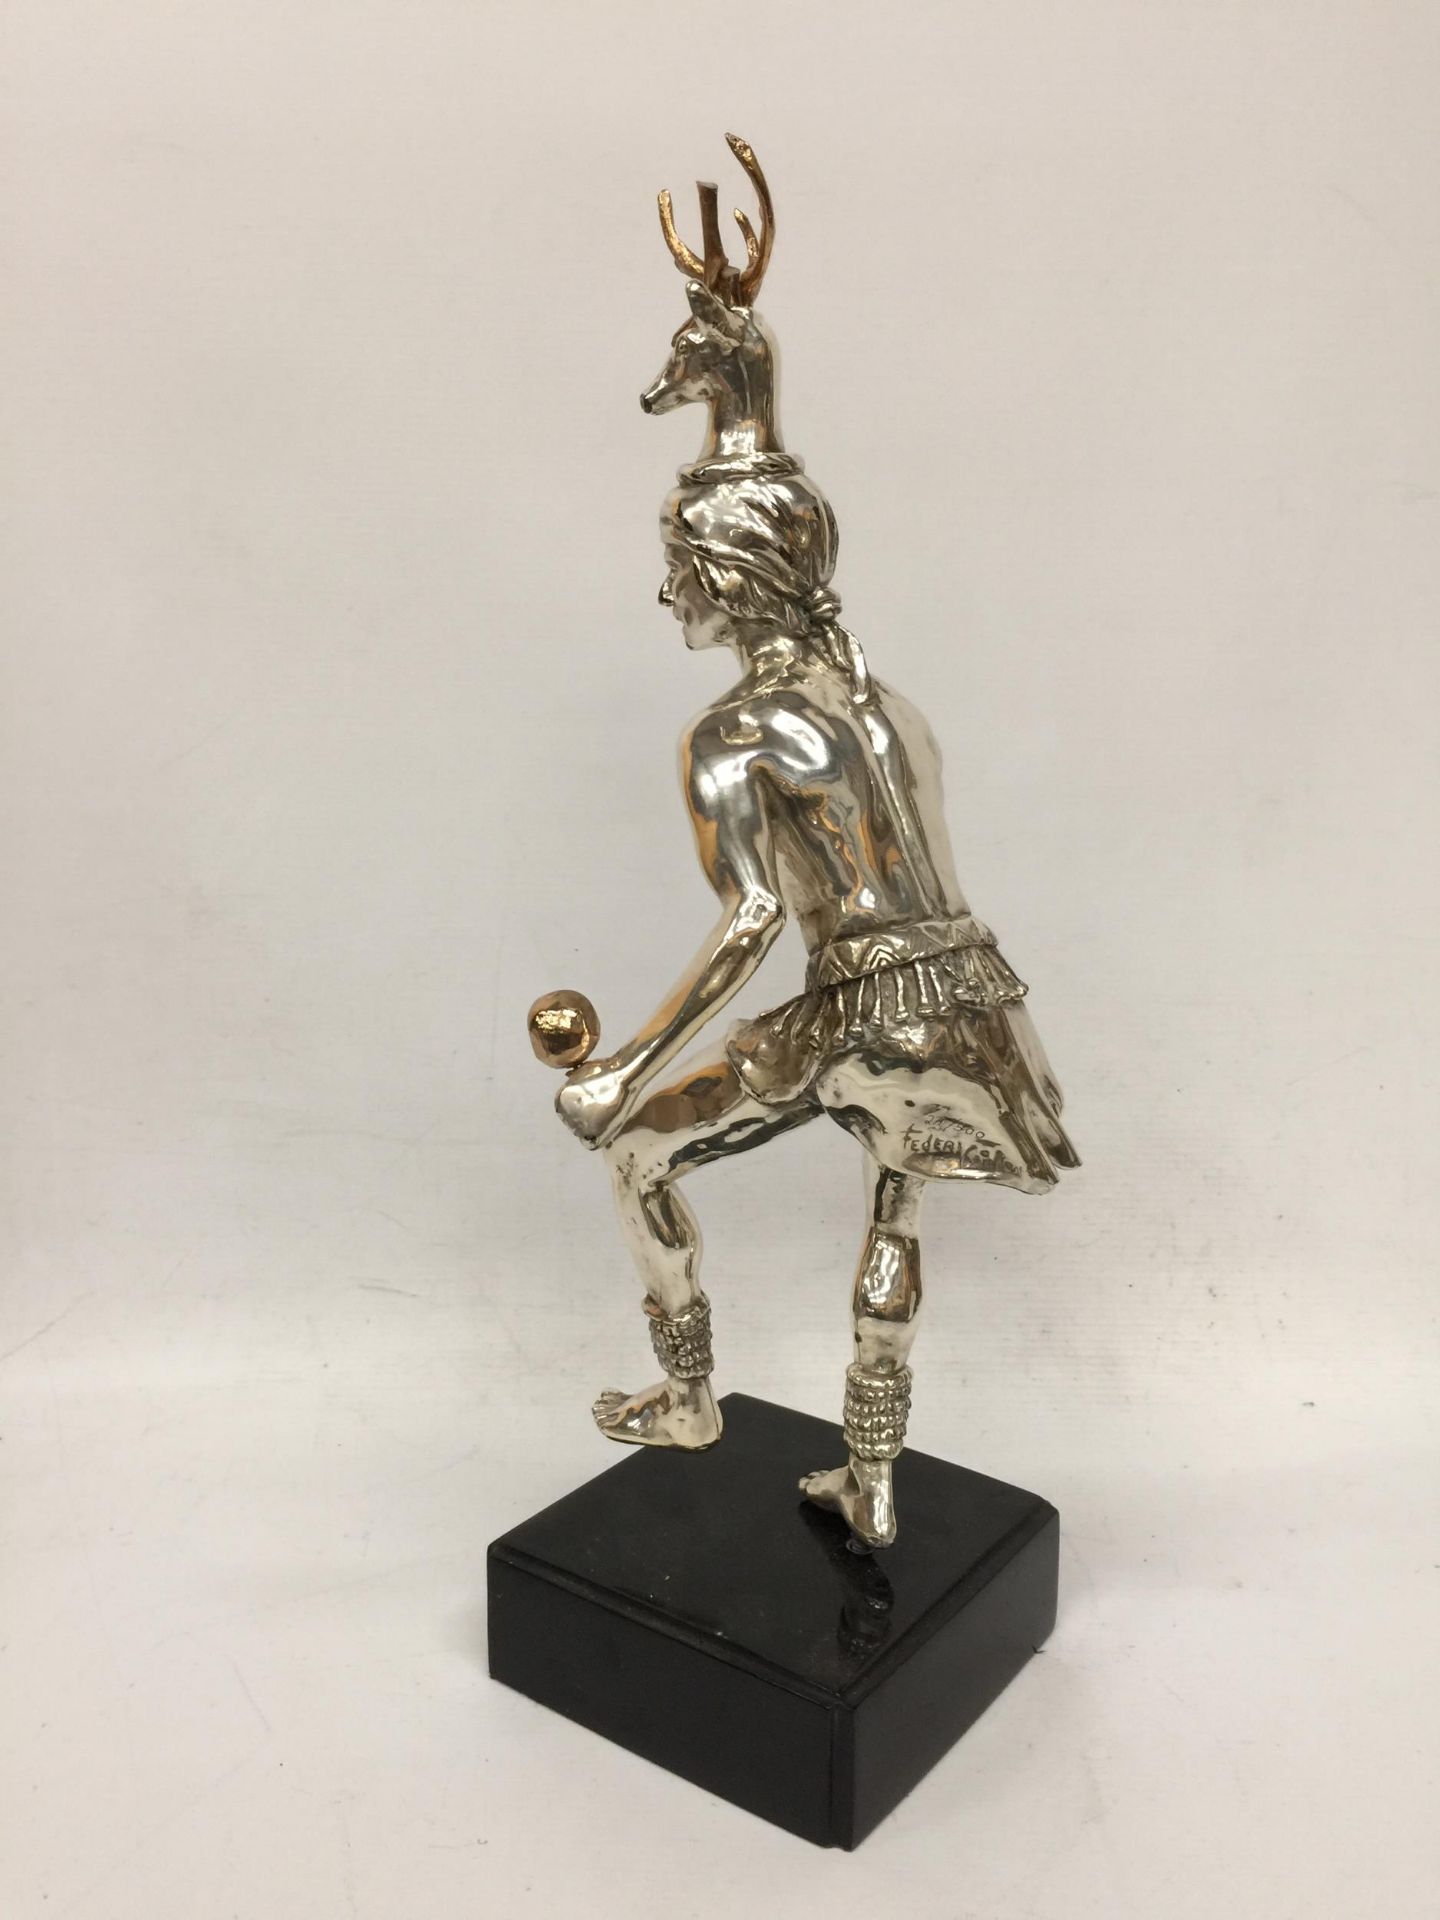 AN UNUSUAL WHITE METAL FIGURE ON BASE, SIGNED FEDERI CARLON?, NUMBERED 271/500 - Image 3 of 5